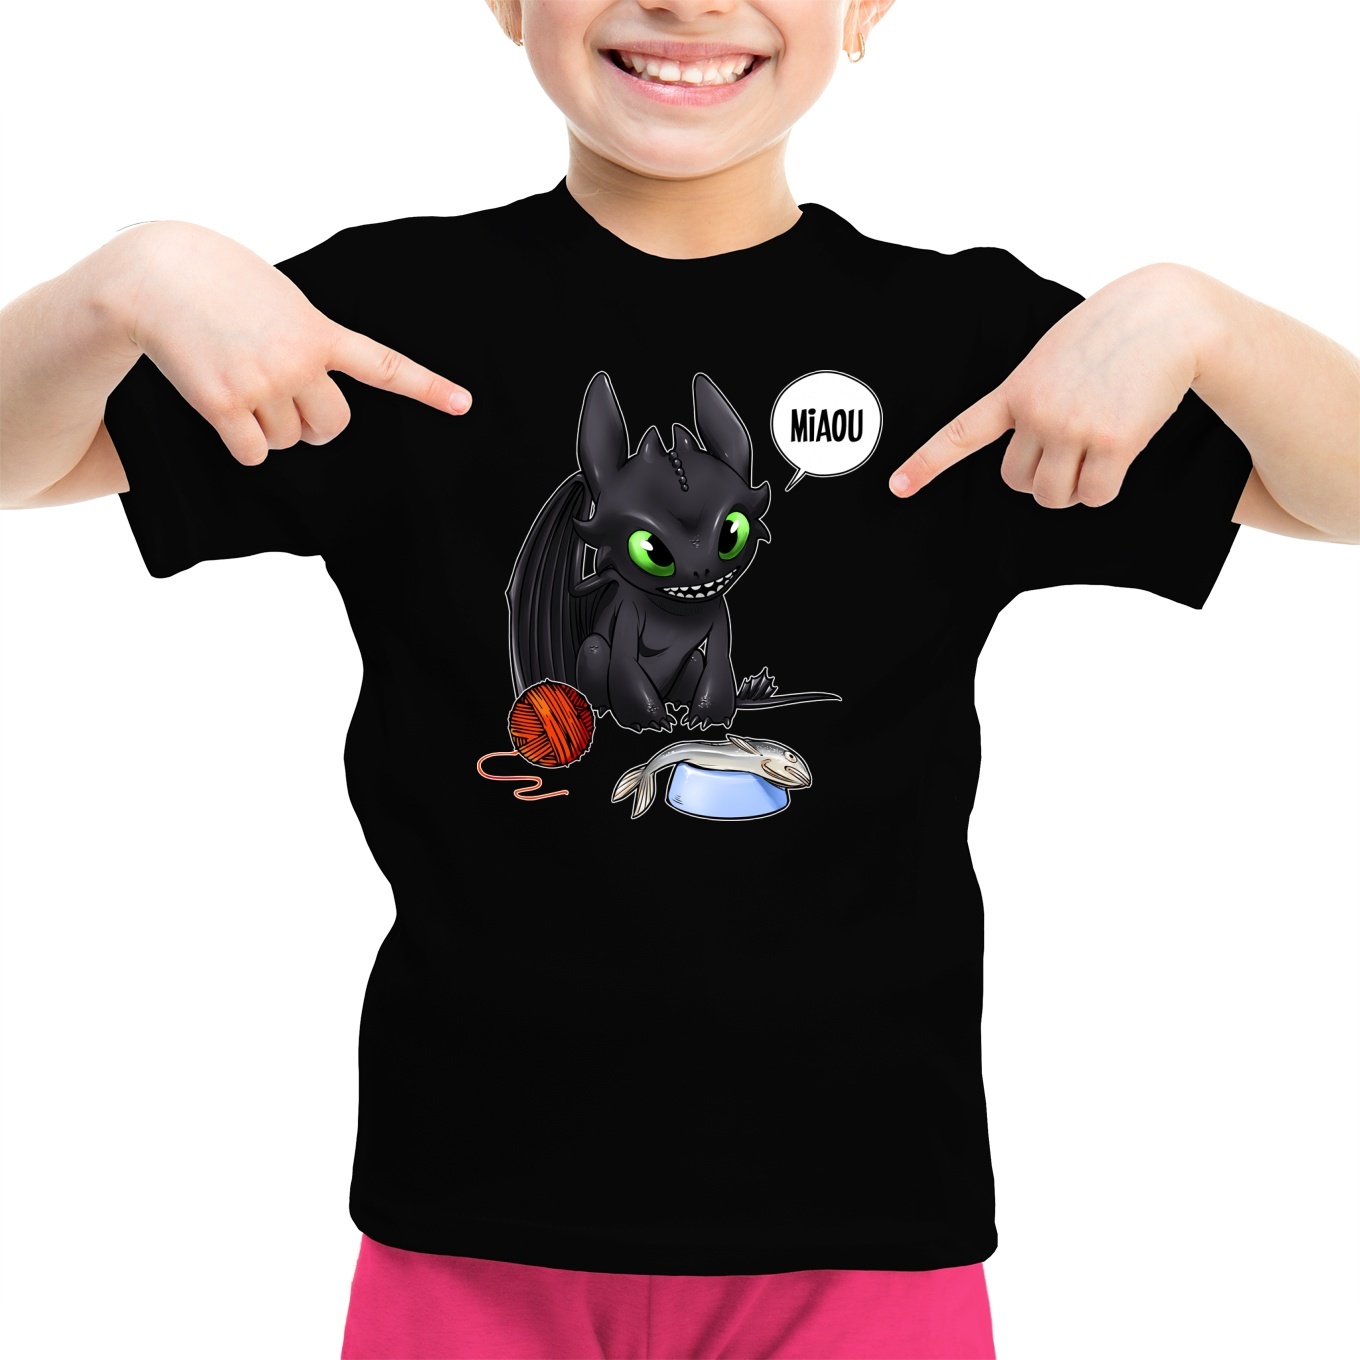 How to Train Your Dragon le film Personalised Kids T-shirt Top Vêtements